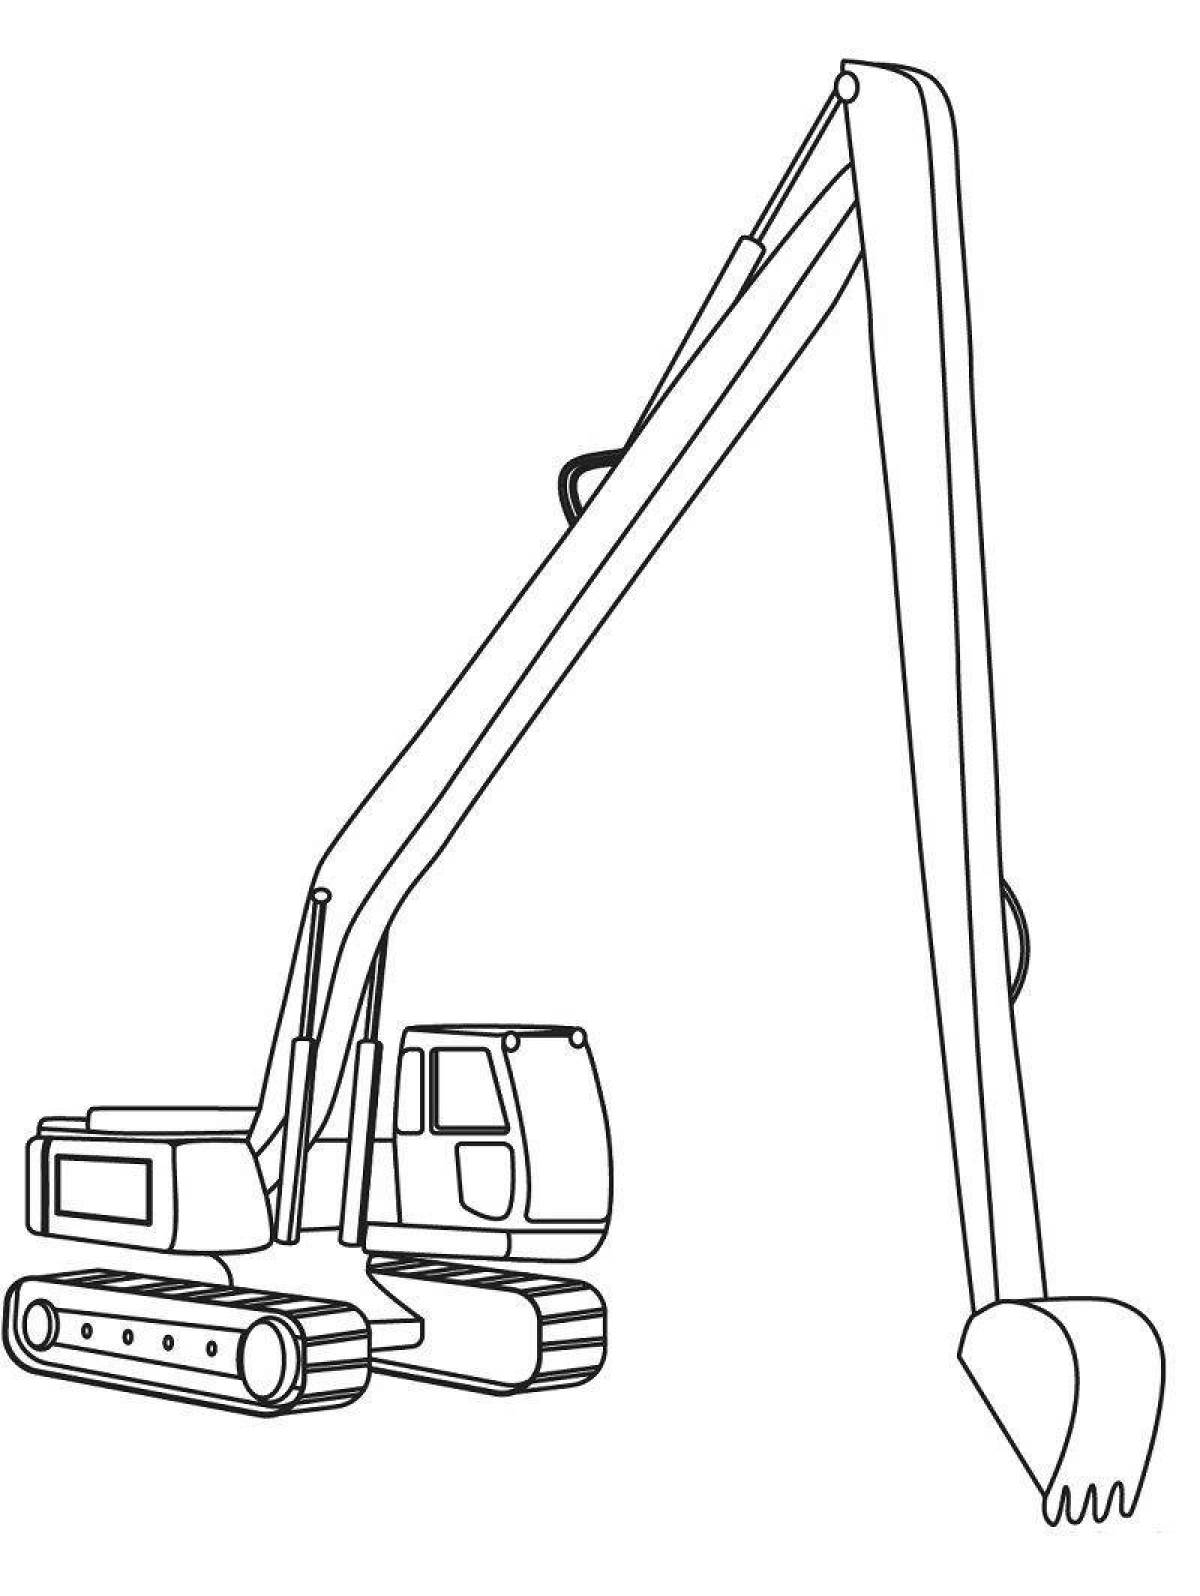 Animated drill press coloring page